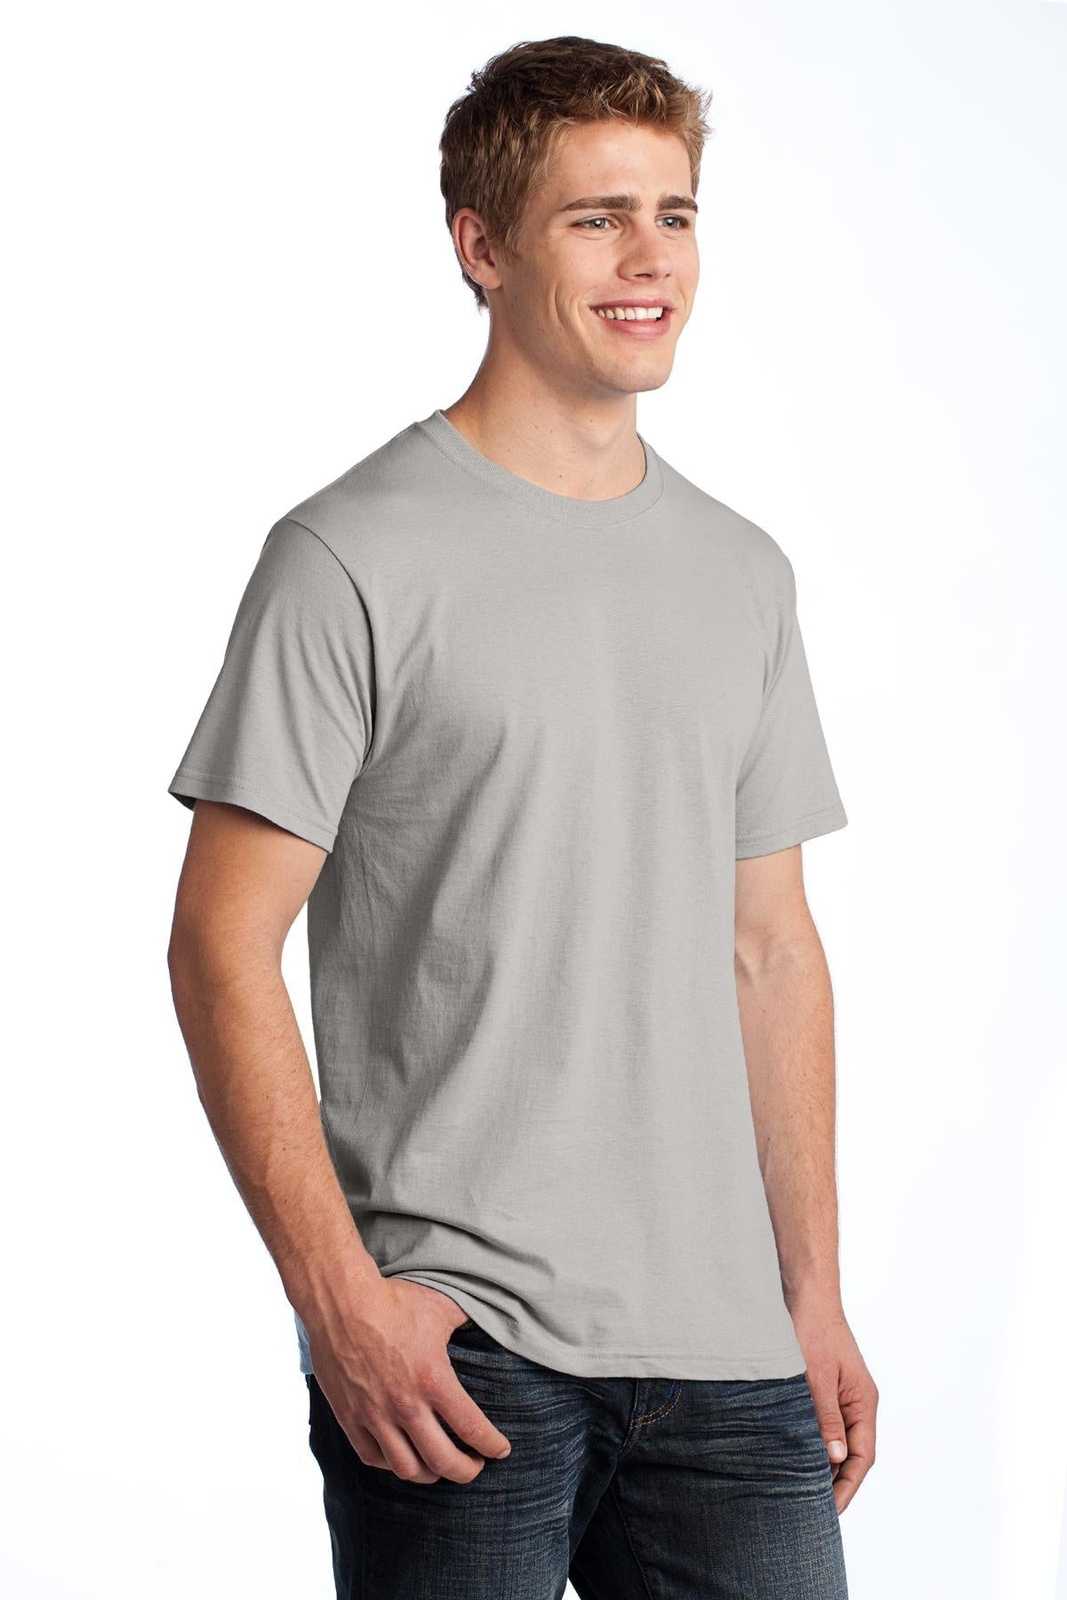 Fruit of the Loom 3930 HD Cotton 100% Cotton T-Shirt - Silver - HIT a Double